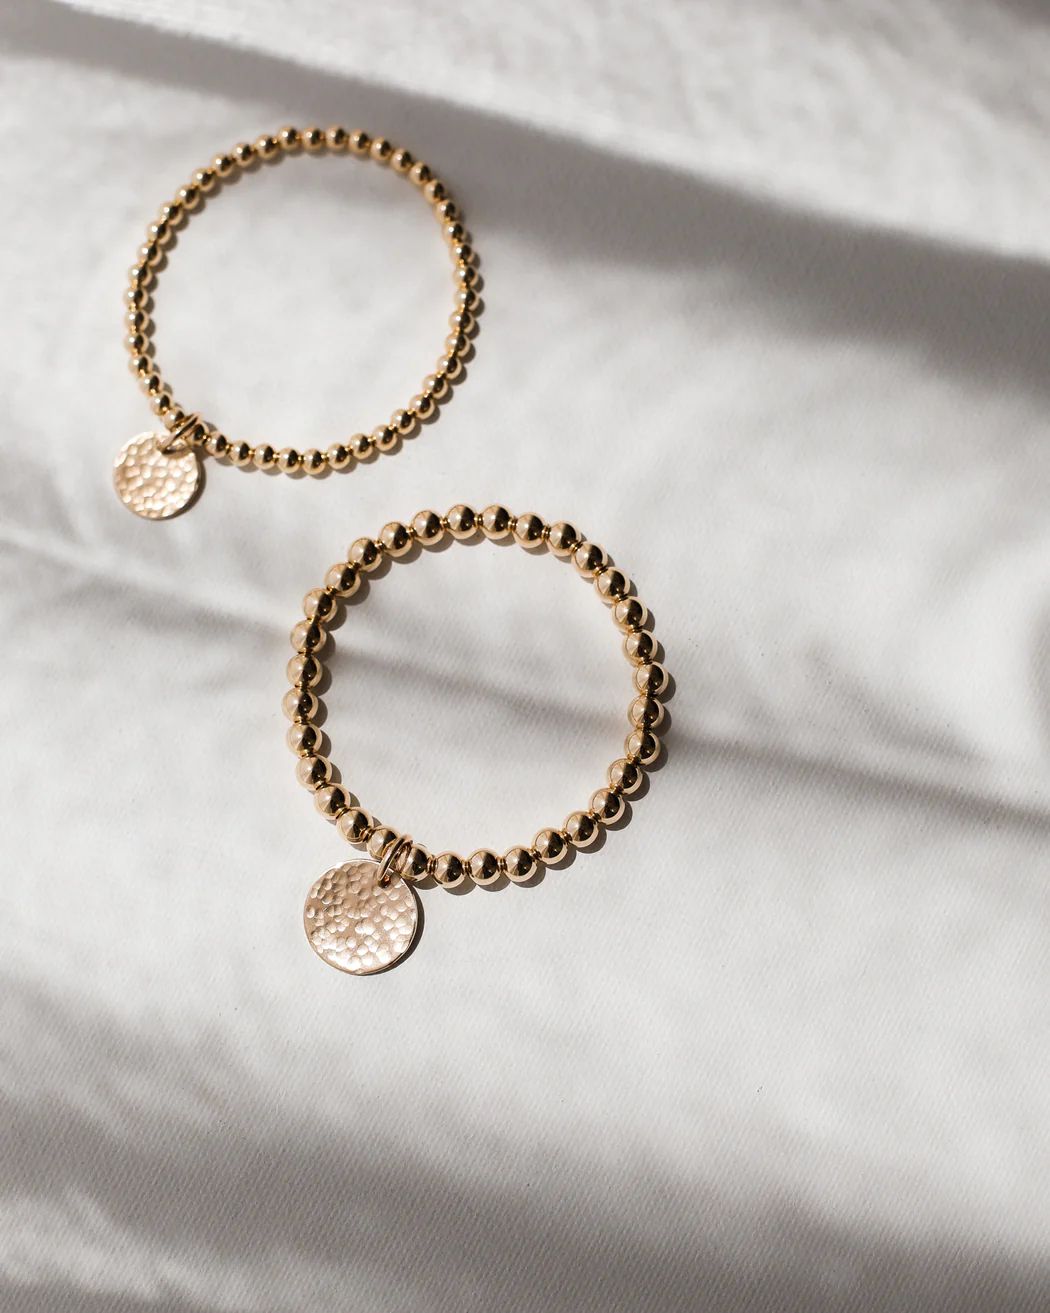 THE HAMMERED COIN BEADED BRACELET - GOLD | Stylin by Aylin